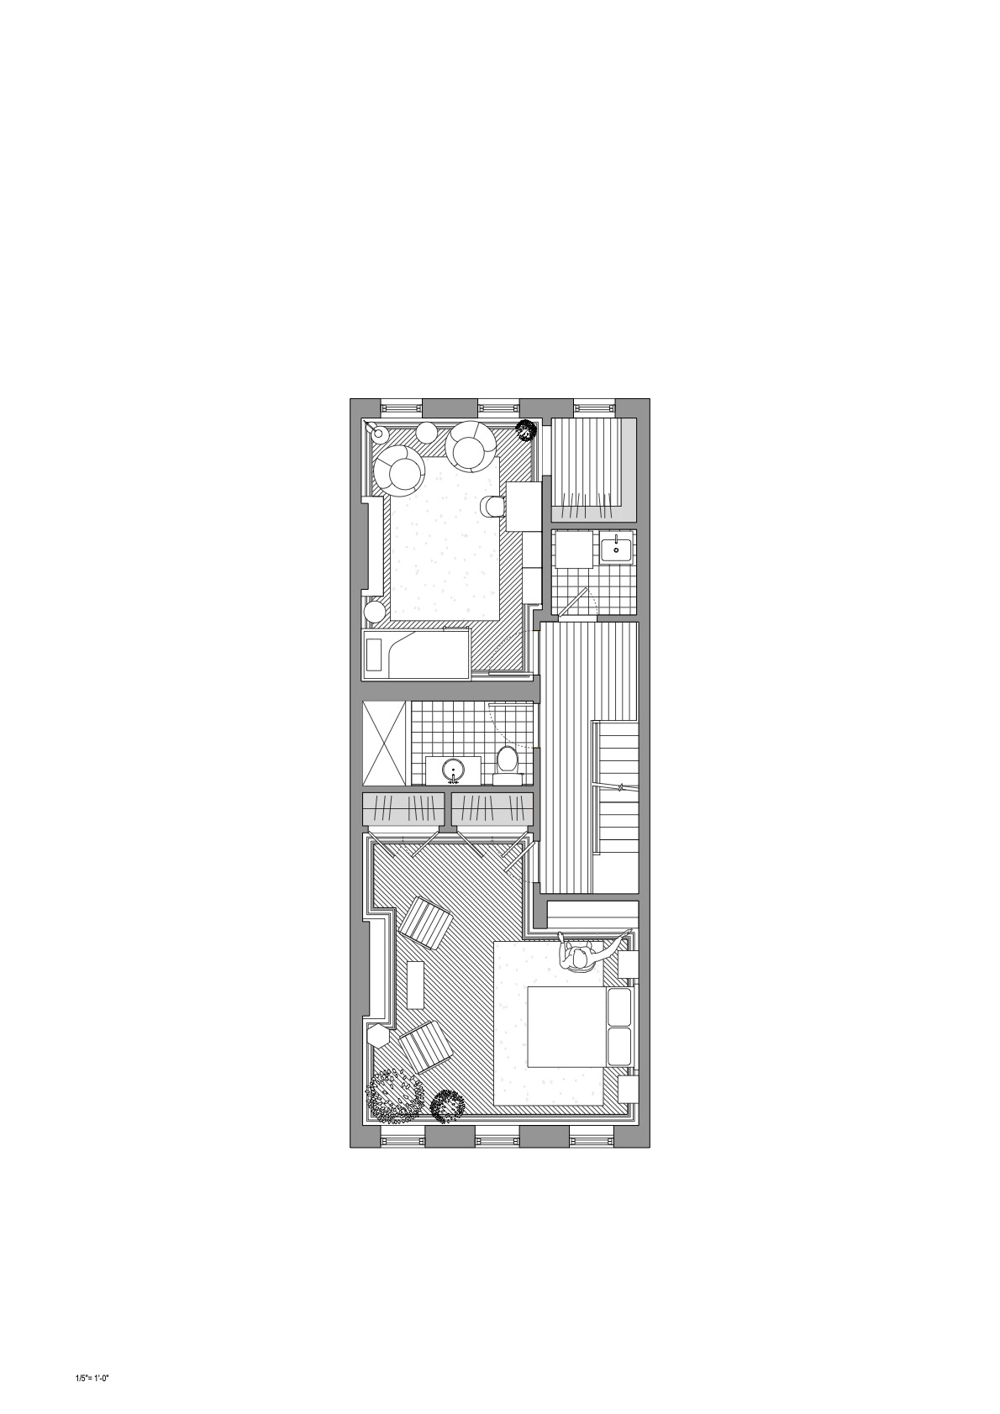 Second Floor Plan, Courtesy Frederick Tang Architecture